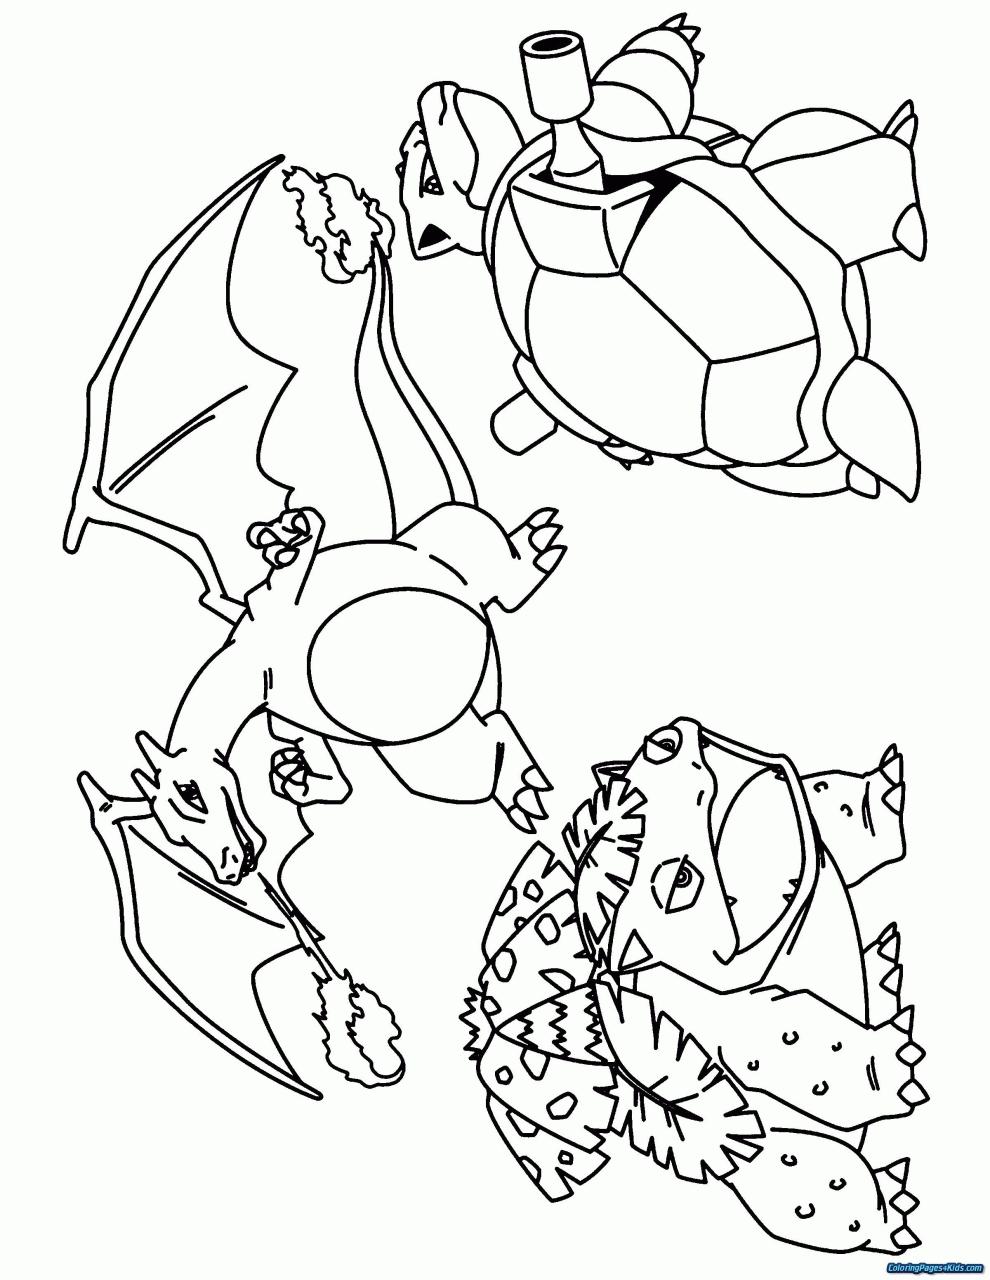 Gmax Charizard Coloring Page Coloring Page Blog